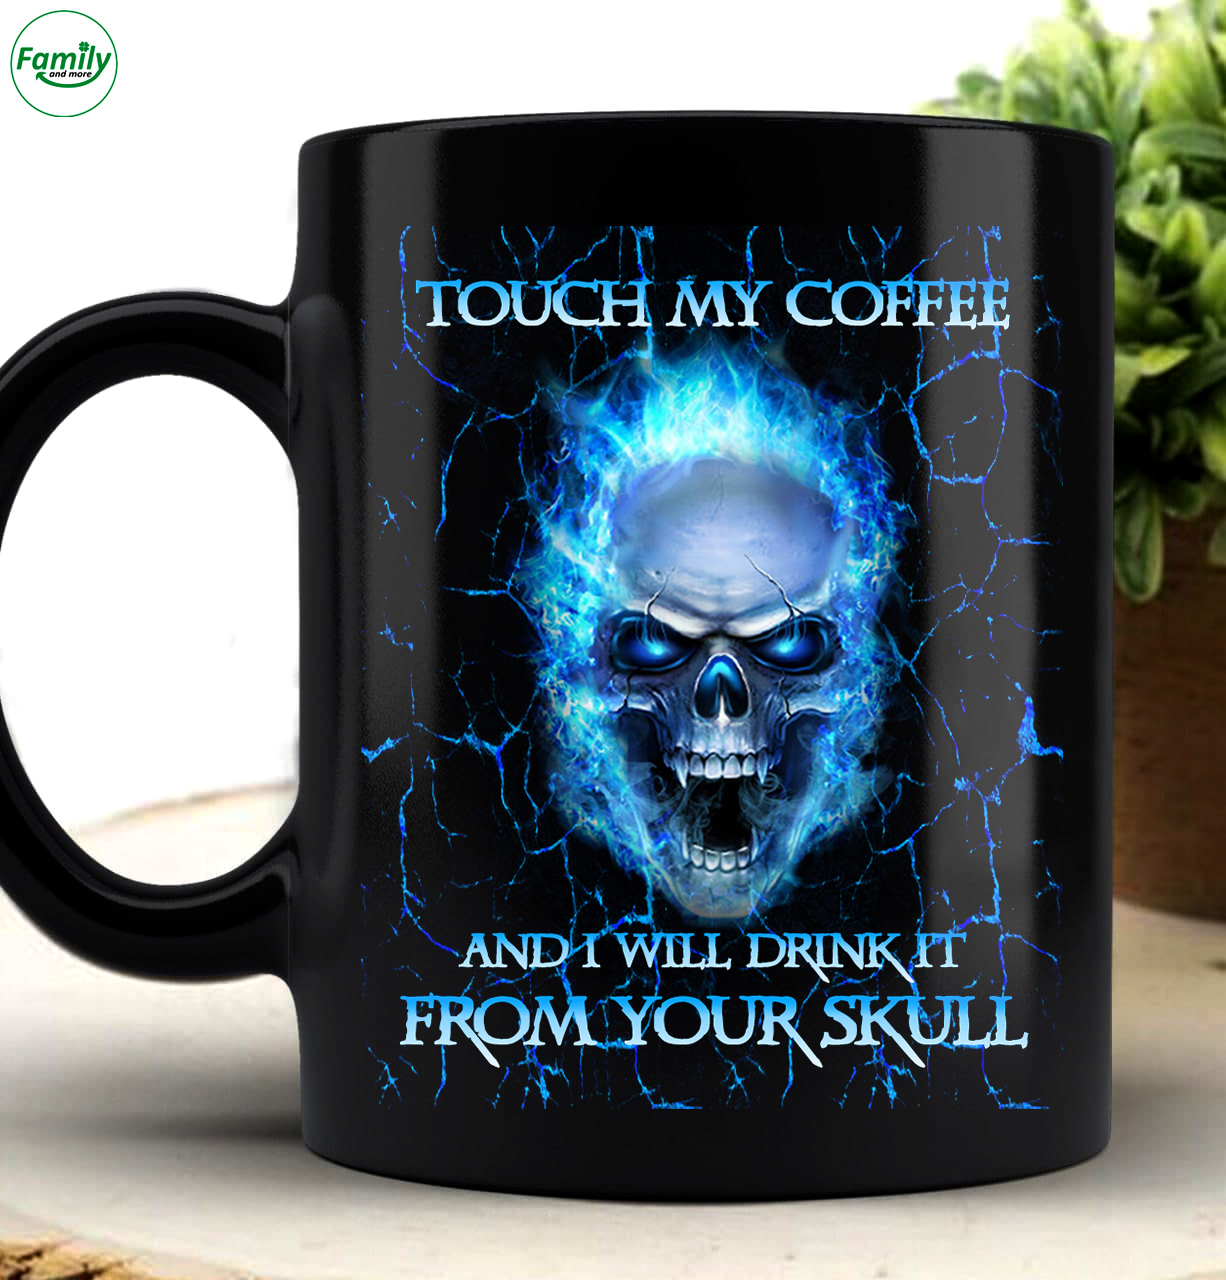 Touch my coffee and i will drink it from your skull mug official v2